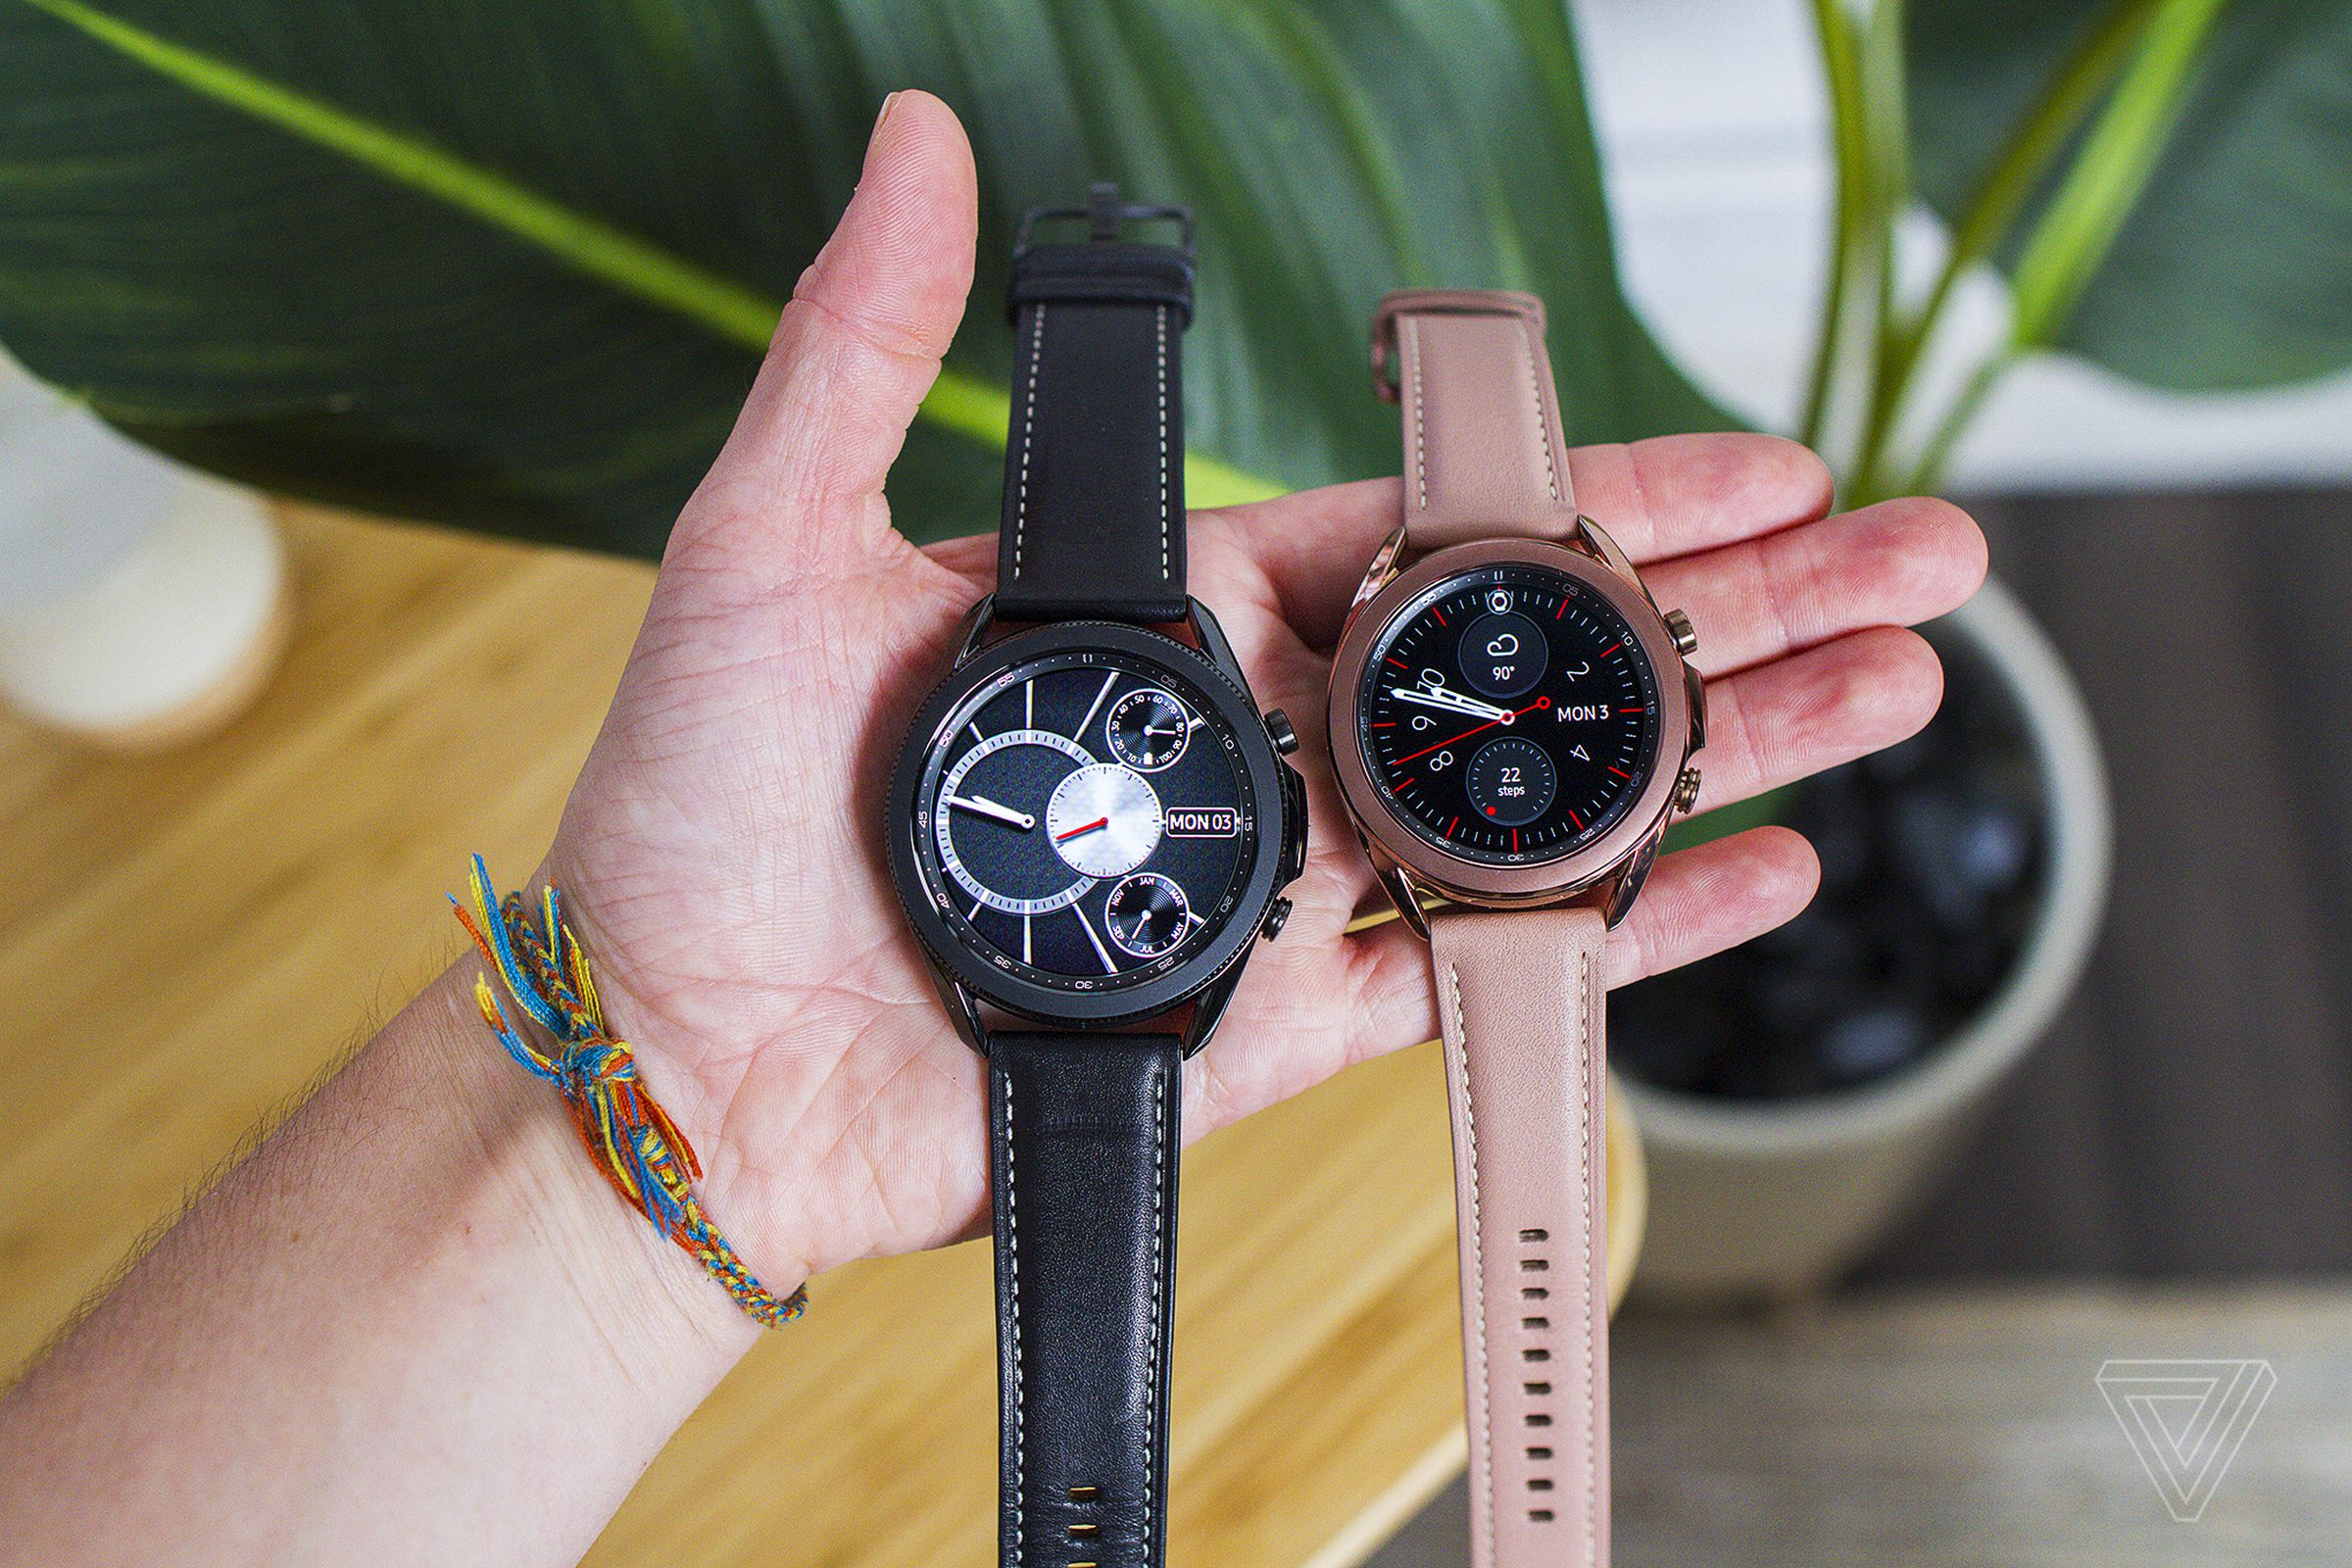 Samsung says the Watch 3 is up to 14 percent thinner and 15 percent lighter than the model it replaces.